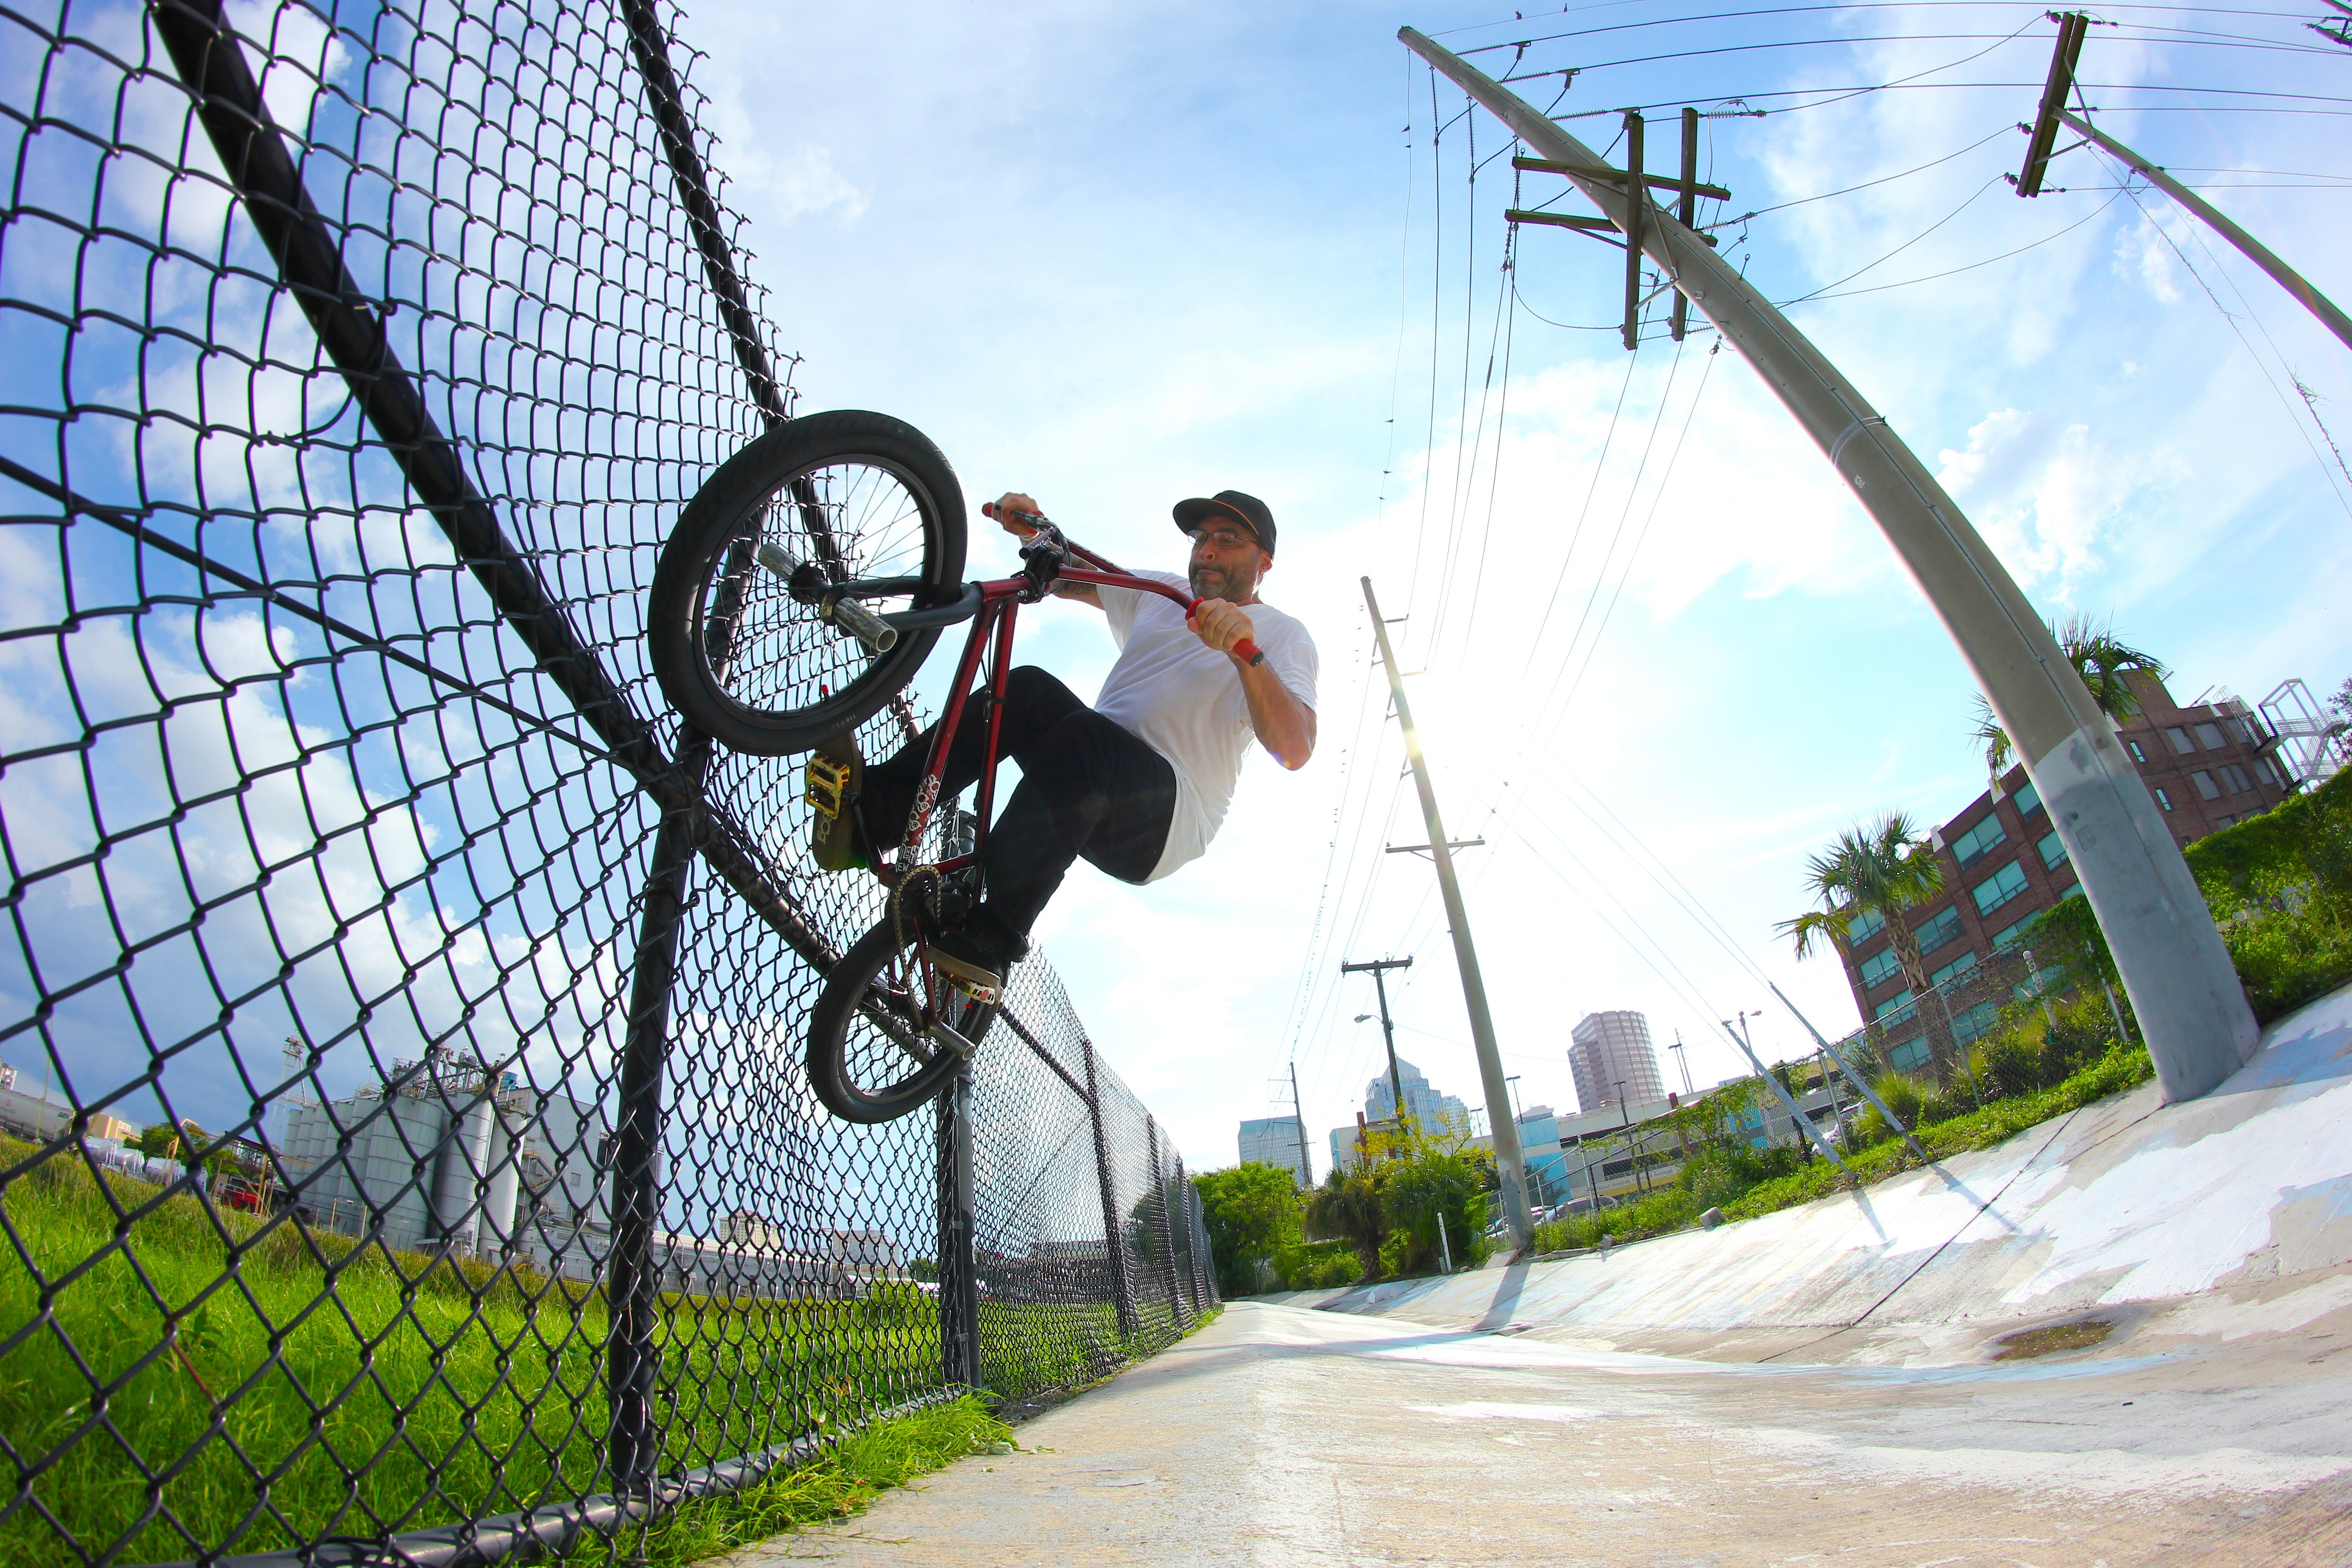 Did you know a bmx shoe company is run out of Florida? Actually, the first rider owned shoe company. SCG Shoes owner, Steve Caro, with an ice on the not so sturdy fence while fertilizer wafts into the humid Tampa Air. 